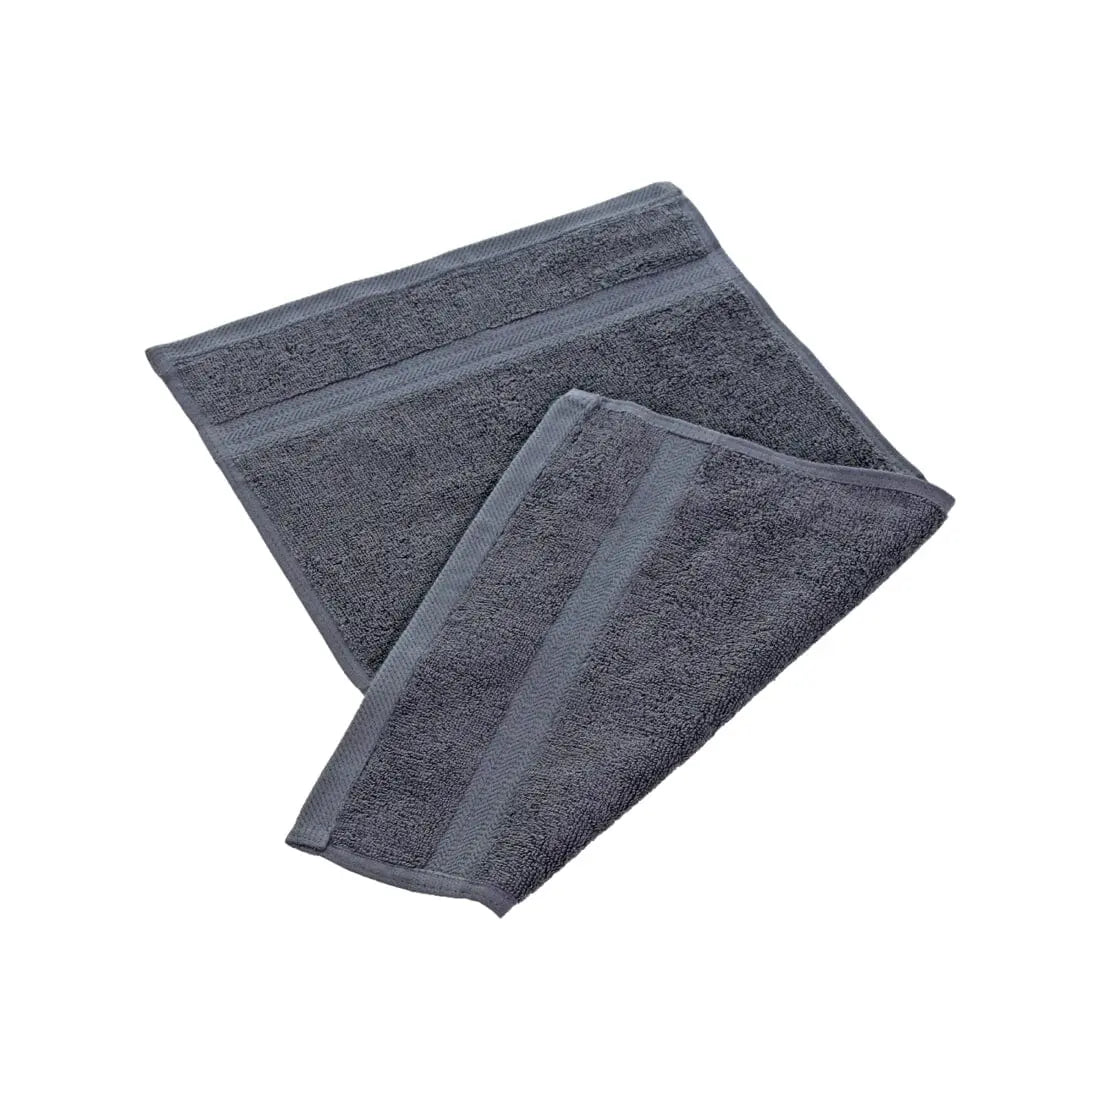 Dark grey egyptian cotton towel ideal for the gym